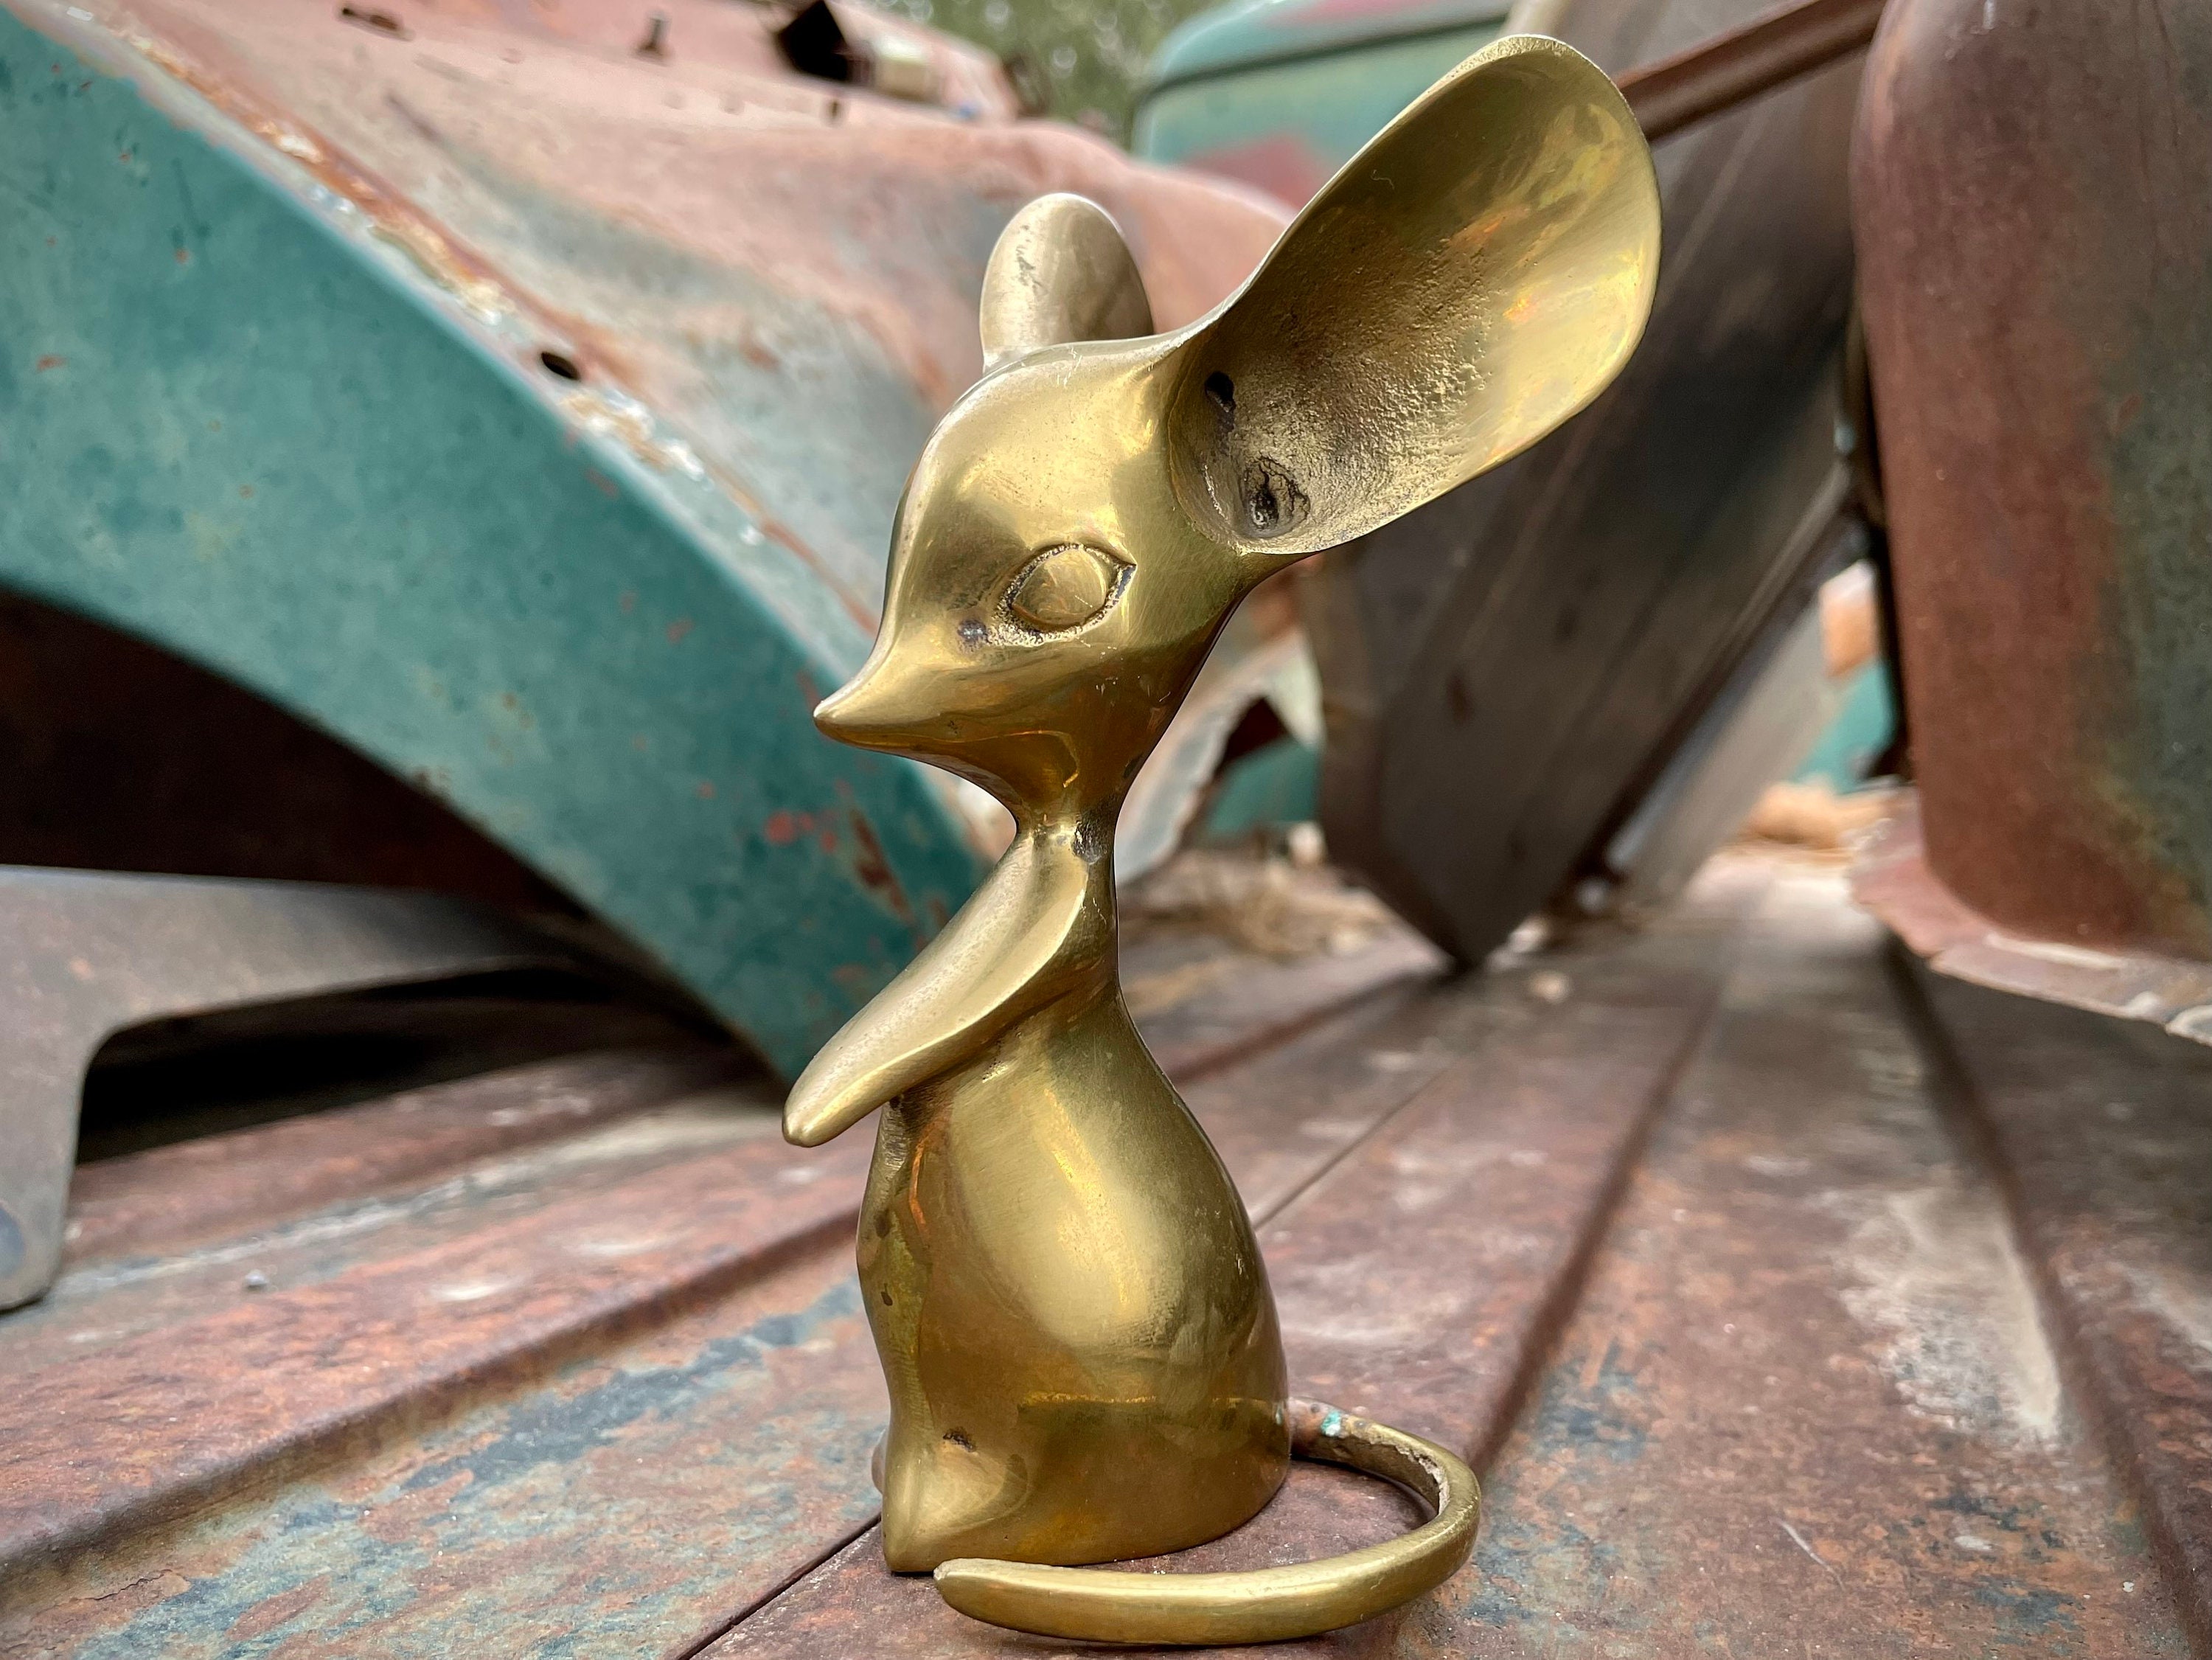 Vintage Solid Brass Mouse With Big Ears Curled Tail Figurine, Collectible  Rodent Paperweight, Eclectic Home Decor Shelf Accent, Cute Gift -   Canada